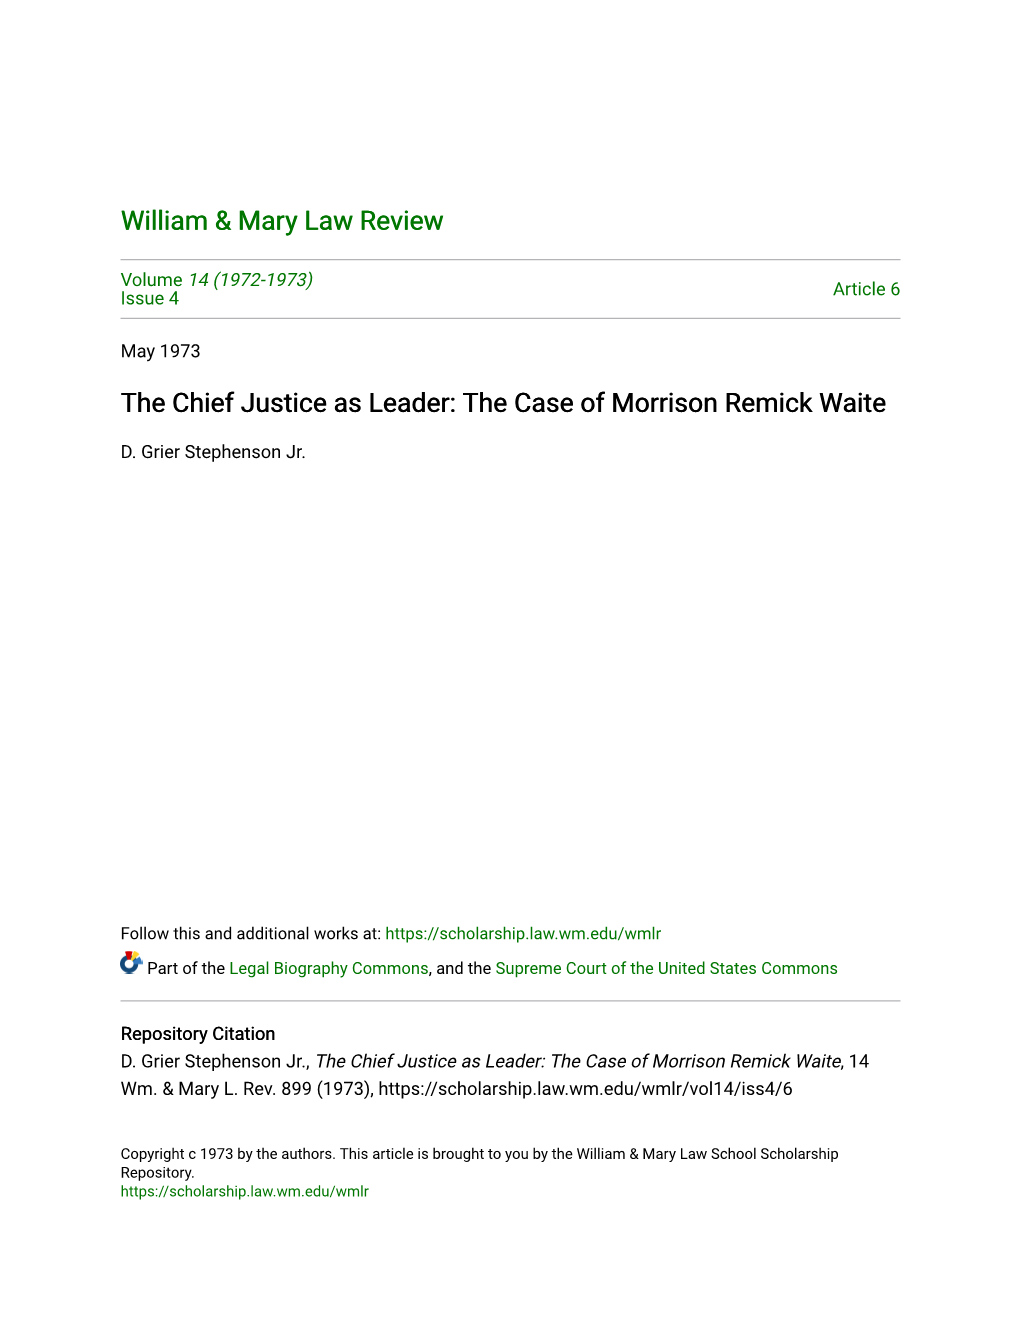 The Chief Justice As Leader: the Case of Morrison Remick Waite